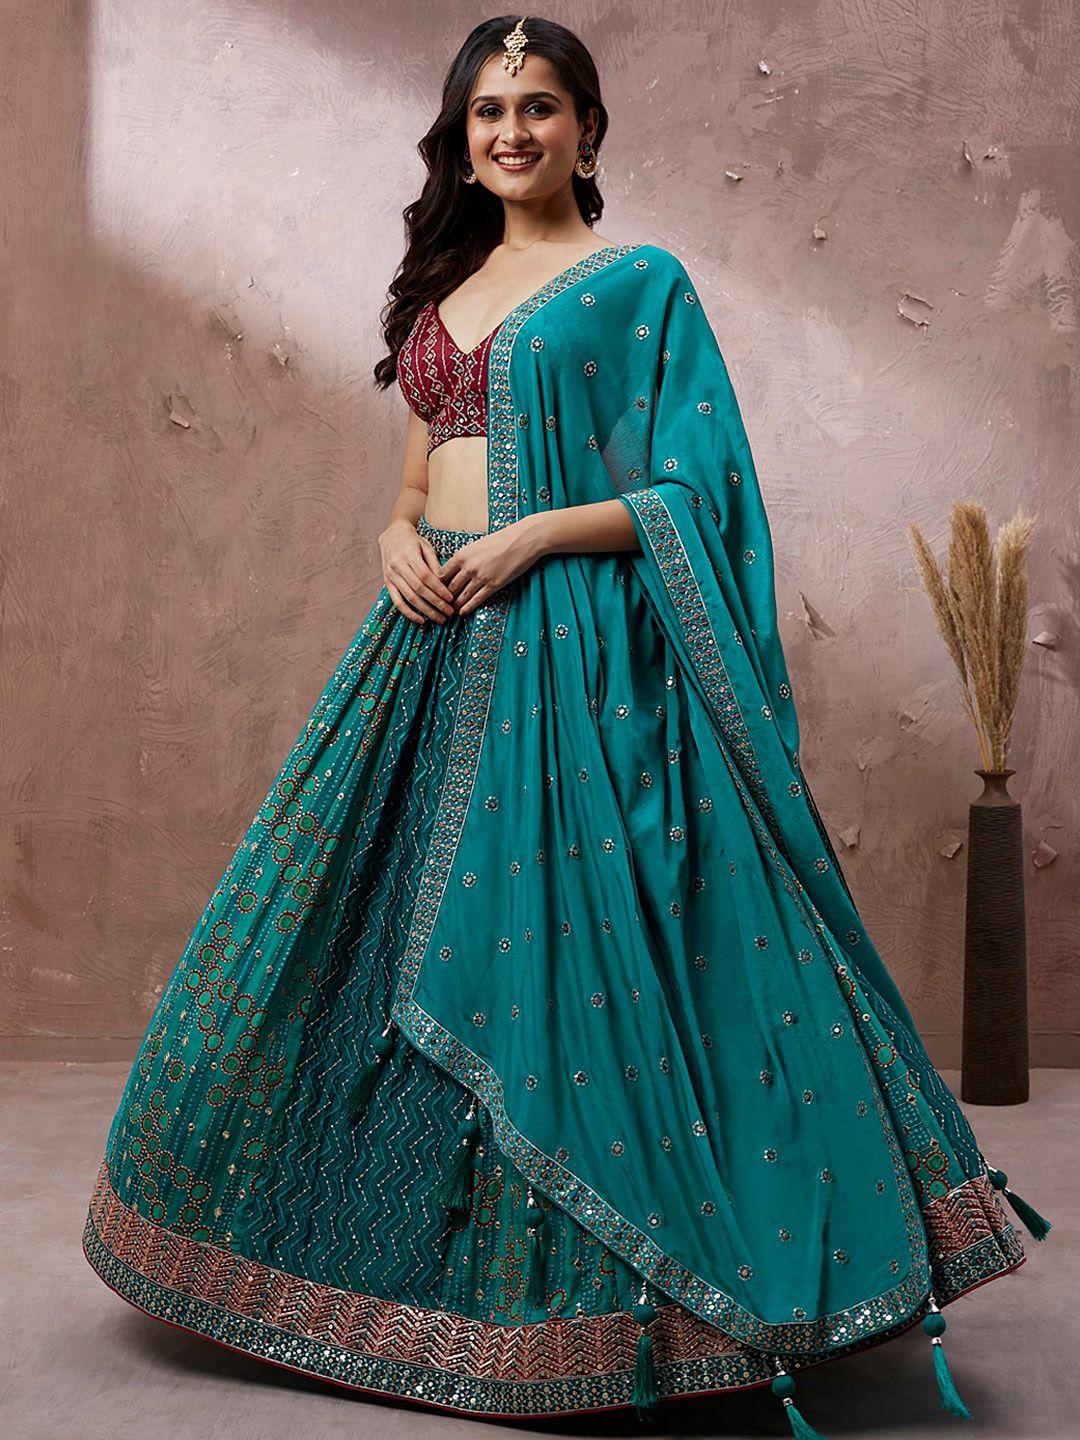 panchhi Ethnic Motifs Embroidered Sequinned Lehenga Choli With Dupatta